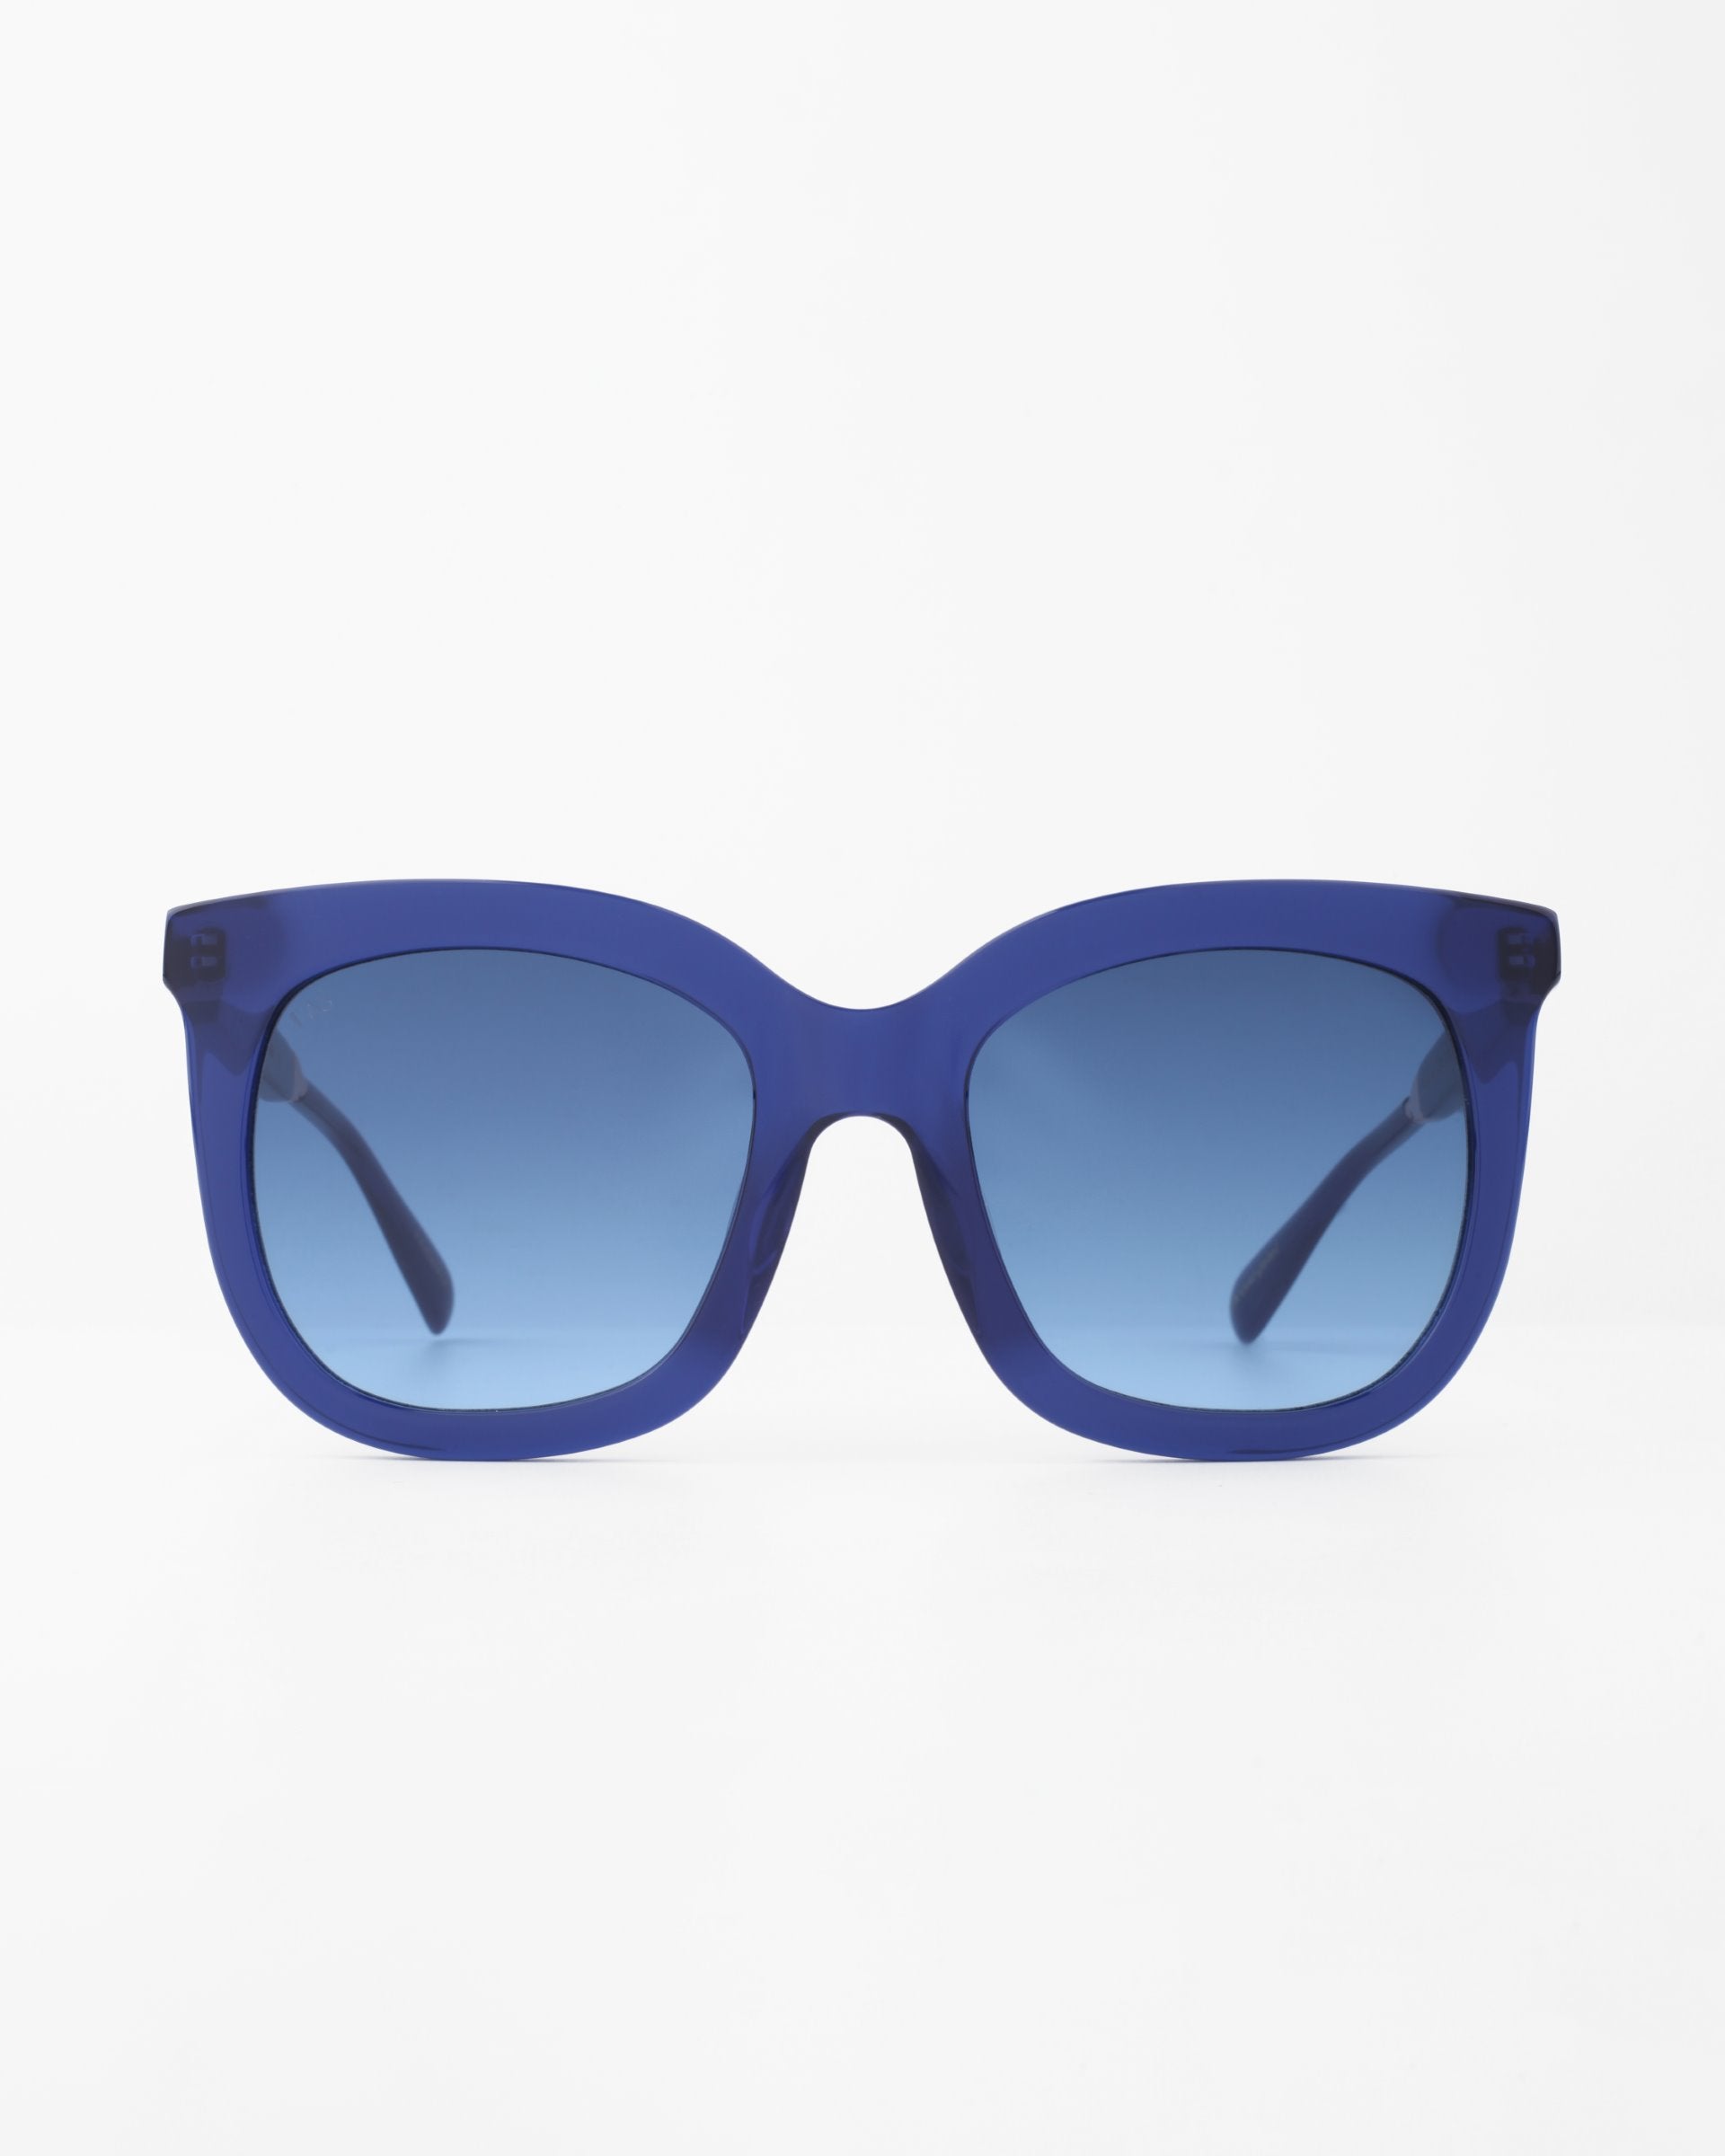 A pair of For Art&#39;s Sake® Riverside square-shaped sunglasses with a blue frame and blue-tinted, shatter-resistant lenses is centered against a white background. The sunglasses have a minimalist and modern design.